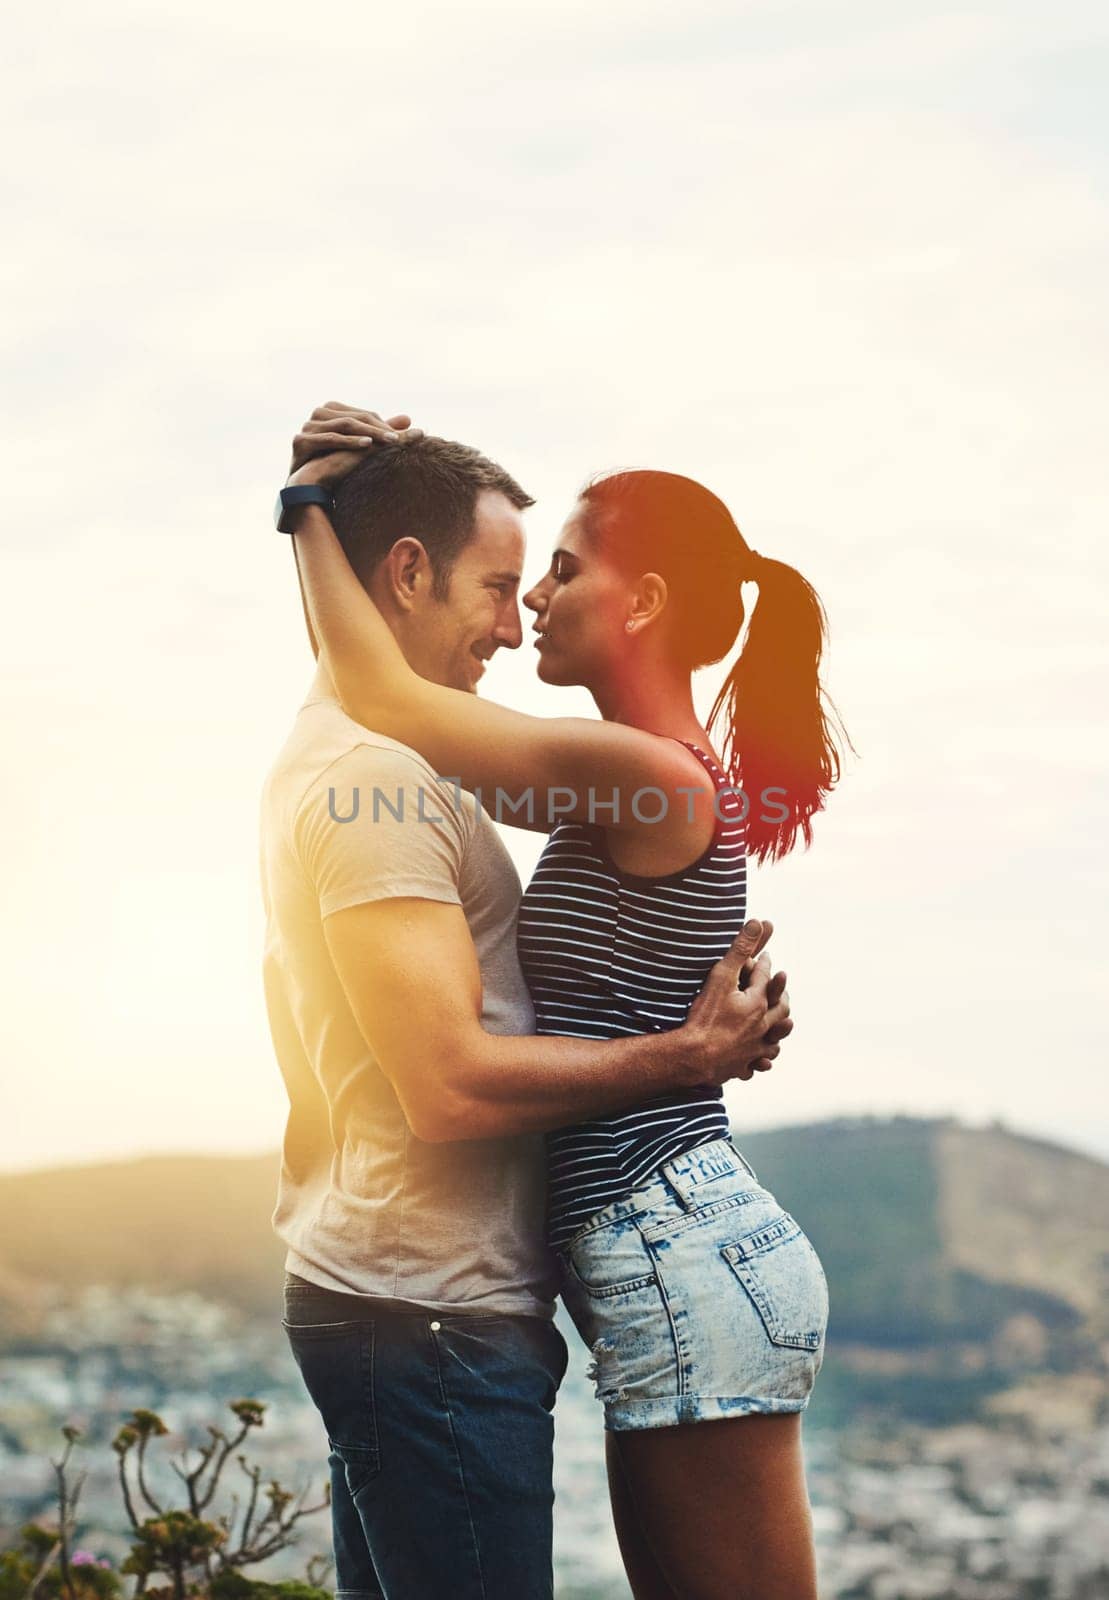 Love, mockup or happy couple hug on outdoor date for trust with support, bond or care. Romantic man, space or woman on holiday vacation together to celebrate, relax or travel in summer or USA.